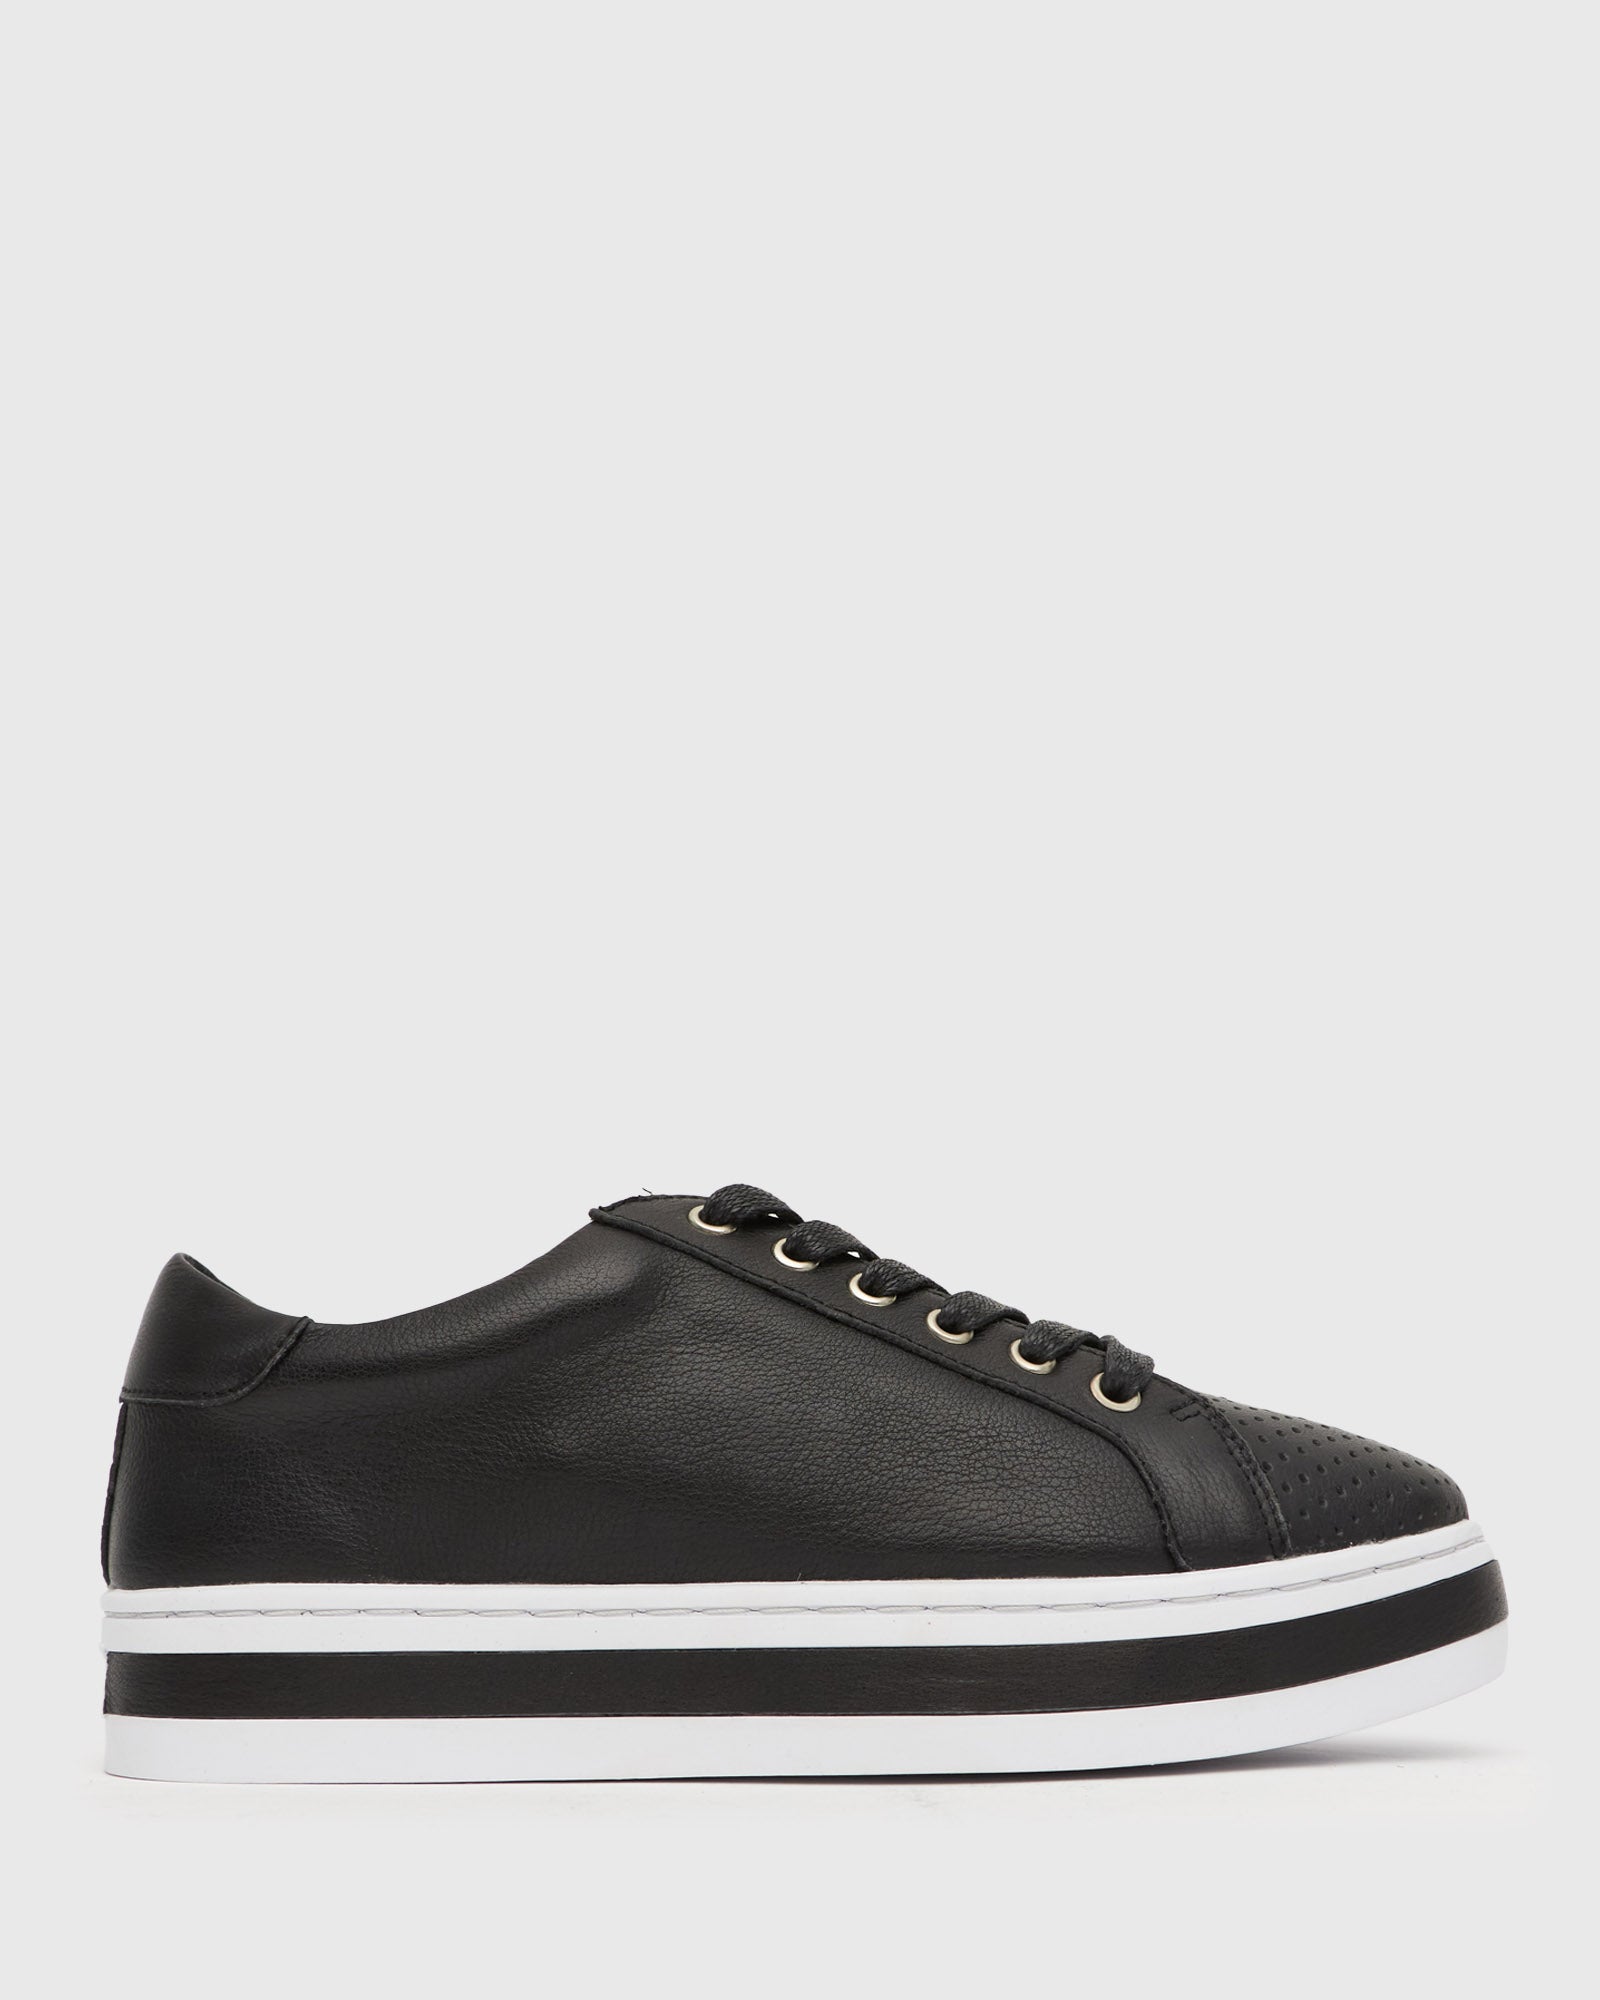 Buy KIMMY Leather Platform Sneakers by Airflex online - Betts